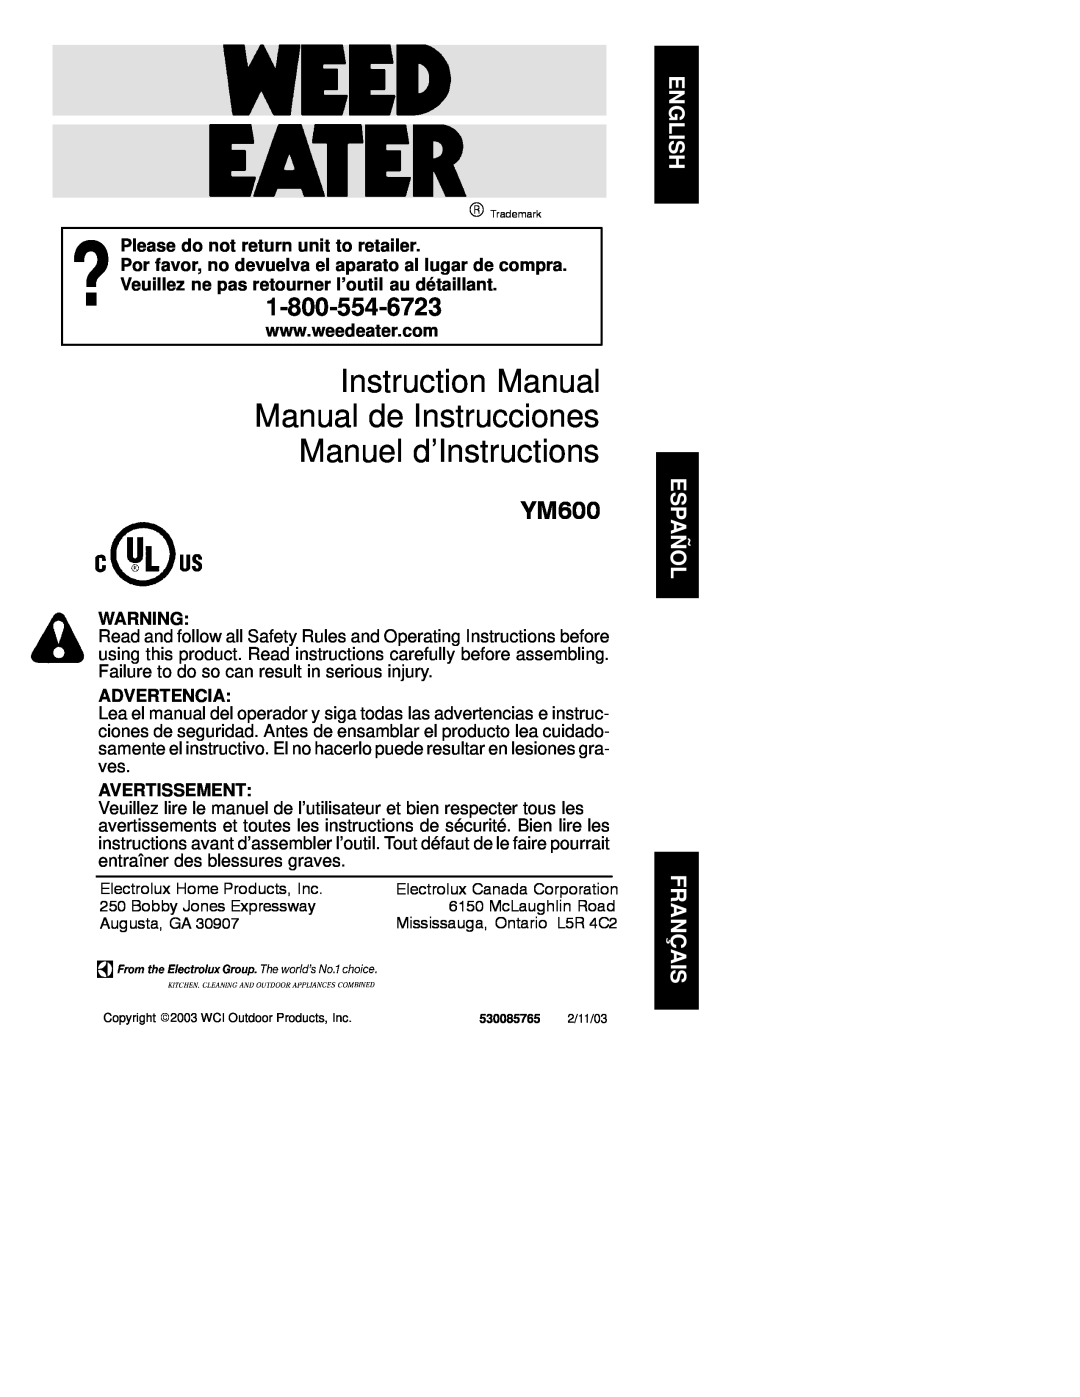 Weed Eater 530085765 instruction manual Please do not return unit to retailer, Advertencia, Avertissement, YM600 